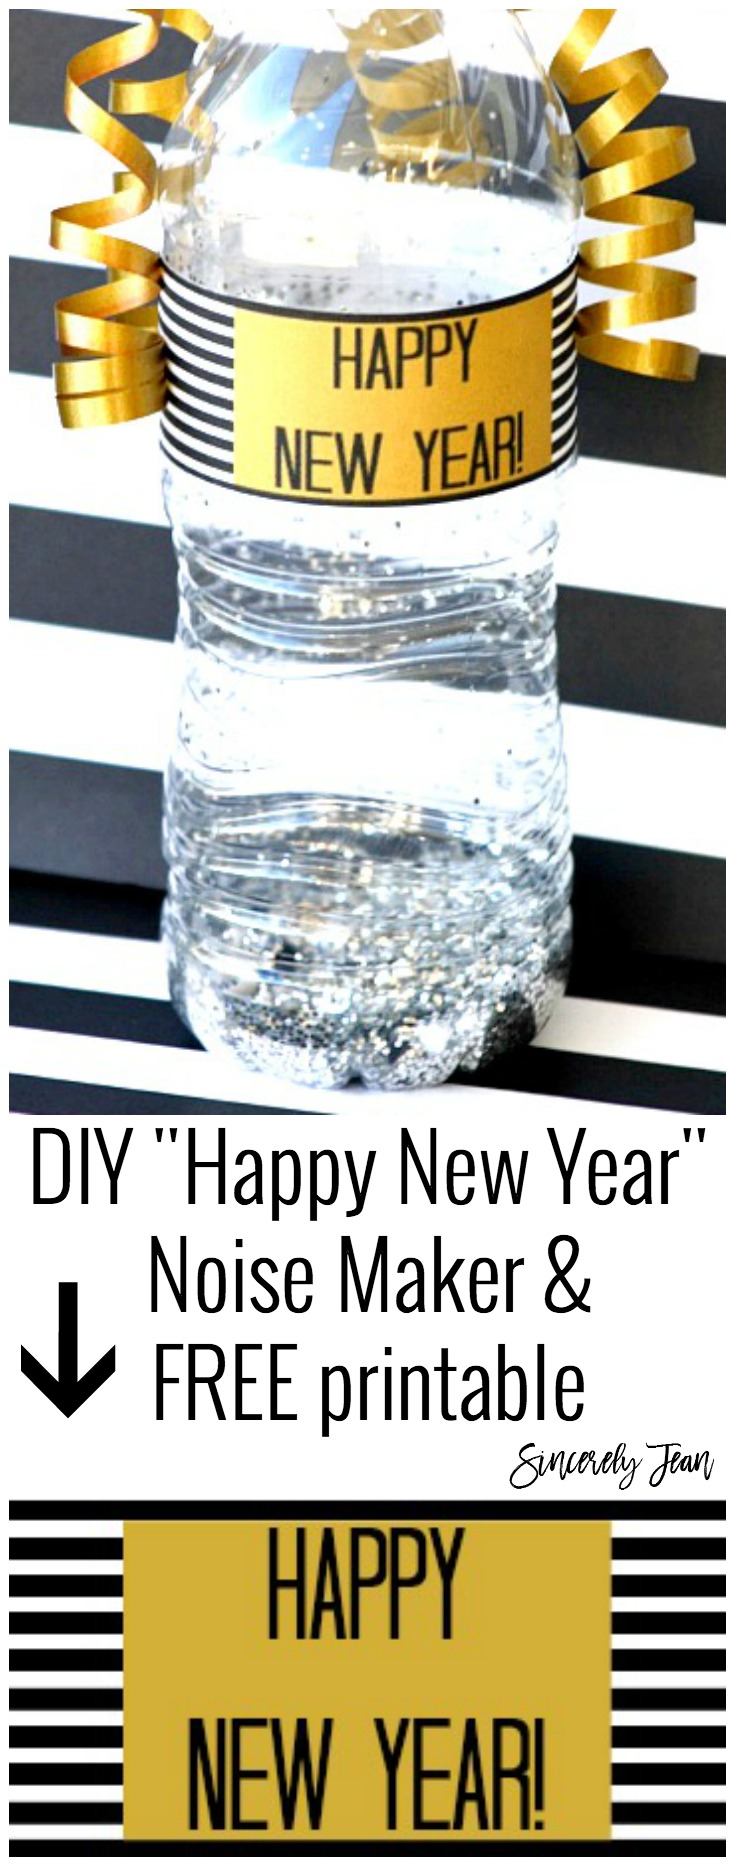 DIY Happy New Year noise maker and free printable - perfect New Years Eve craft for kids to make! | www.SincerelyJean.com